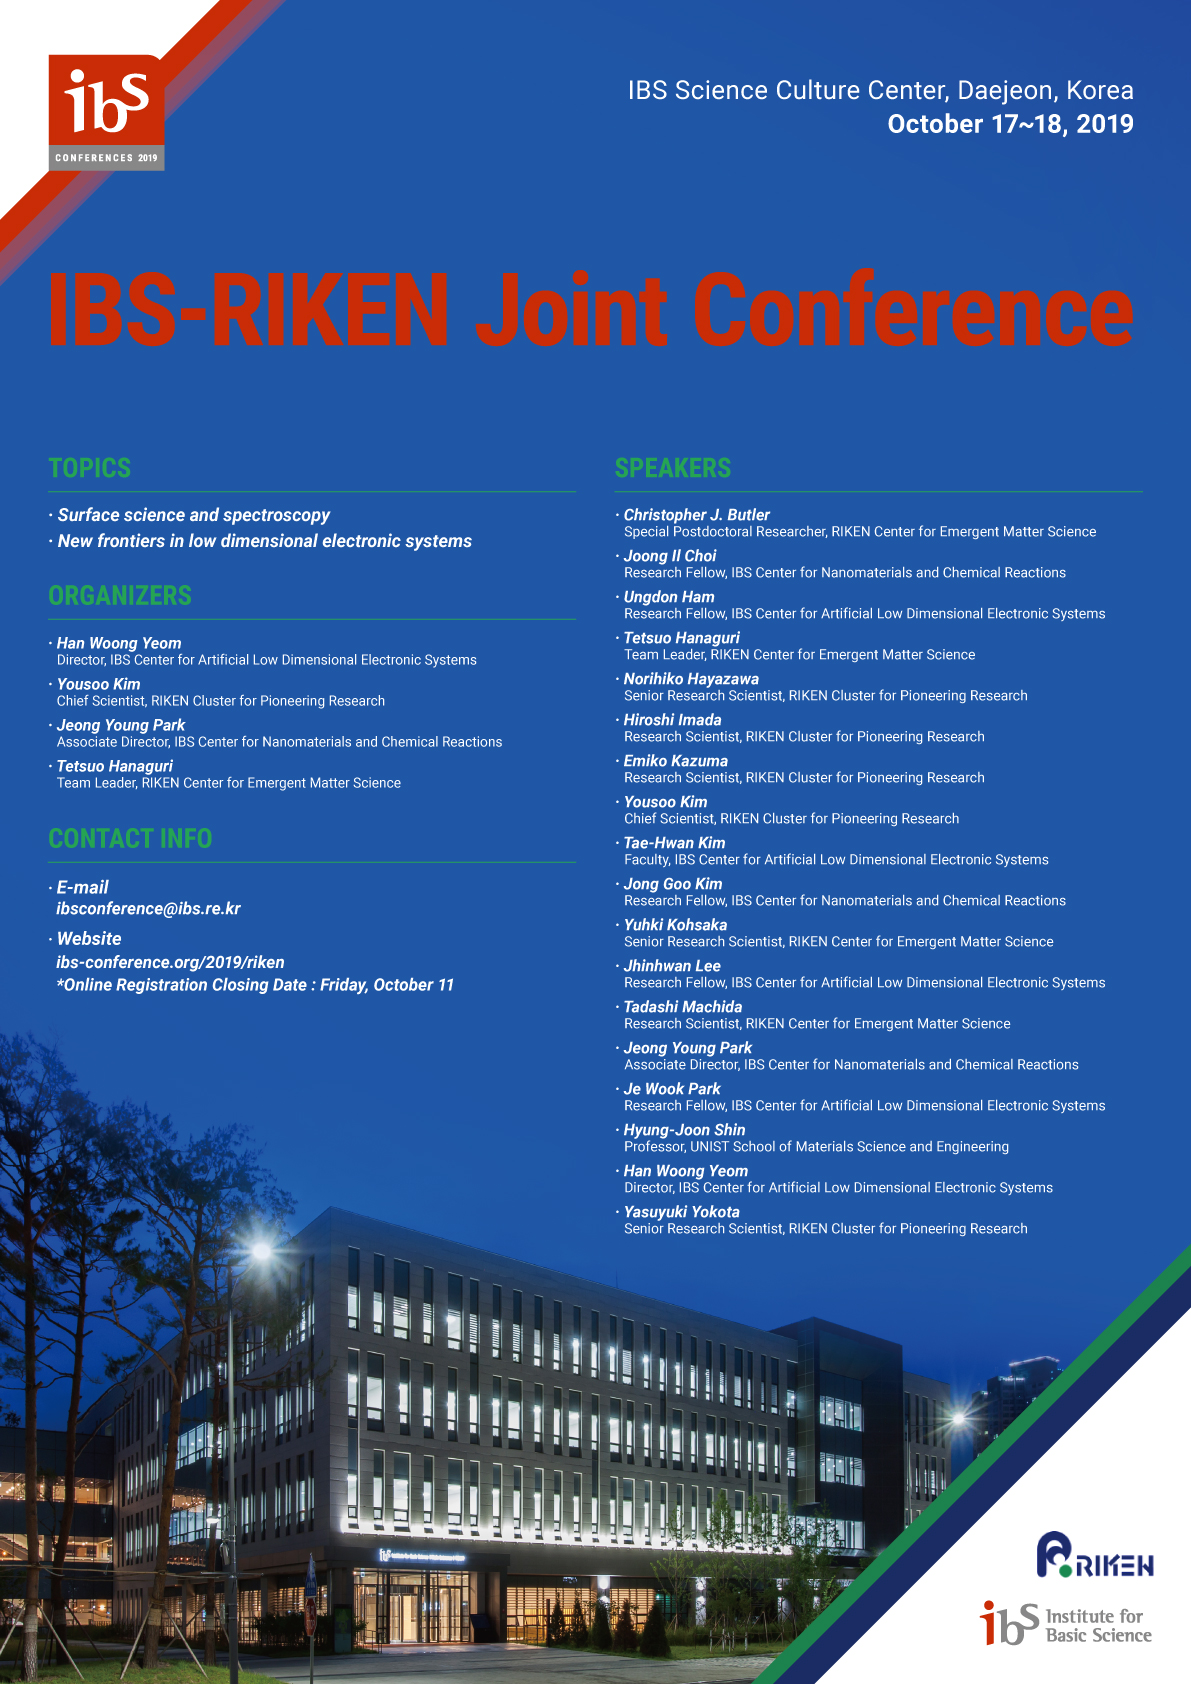 IBS-RIKEN Joint Conference 사진